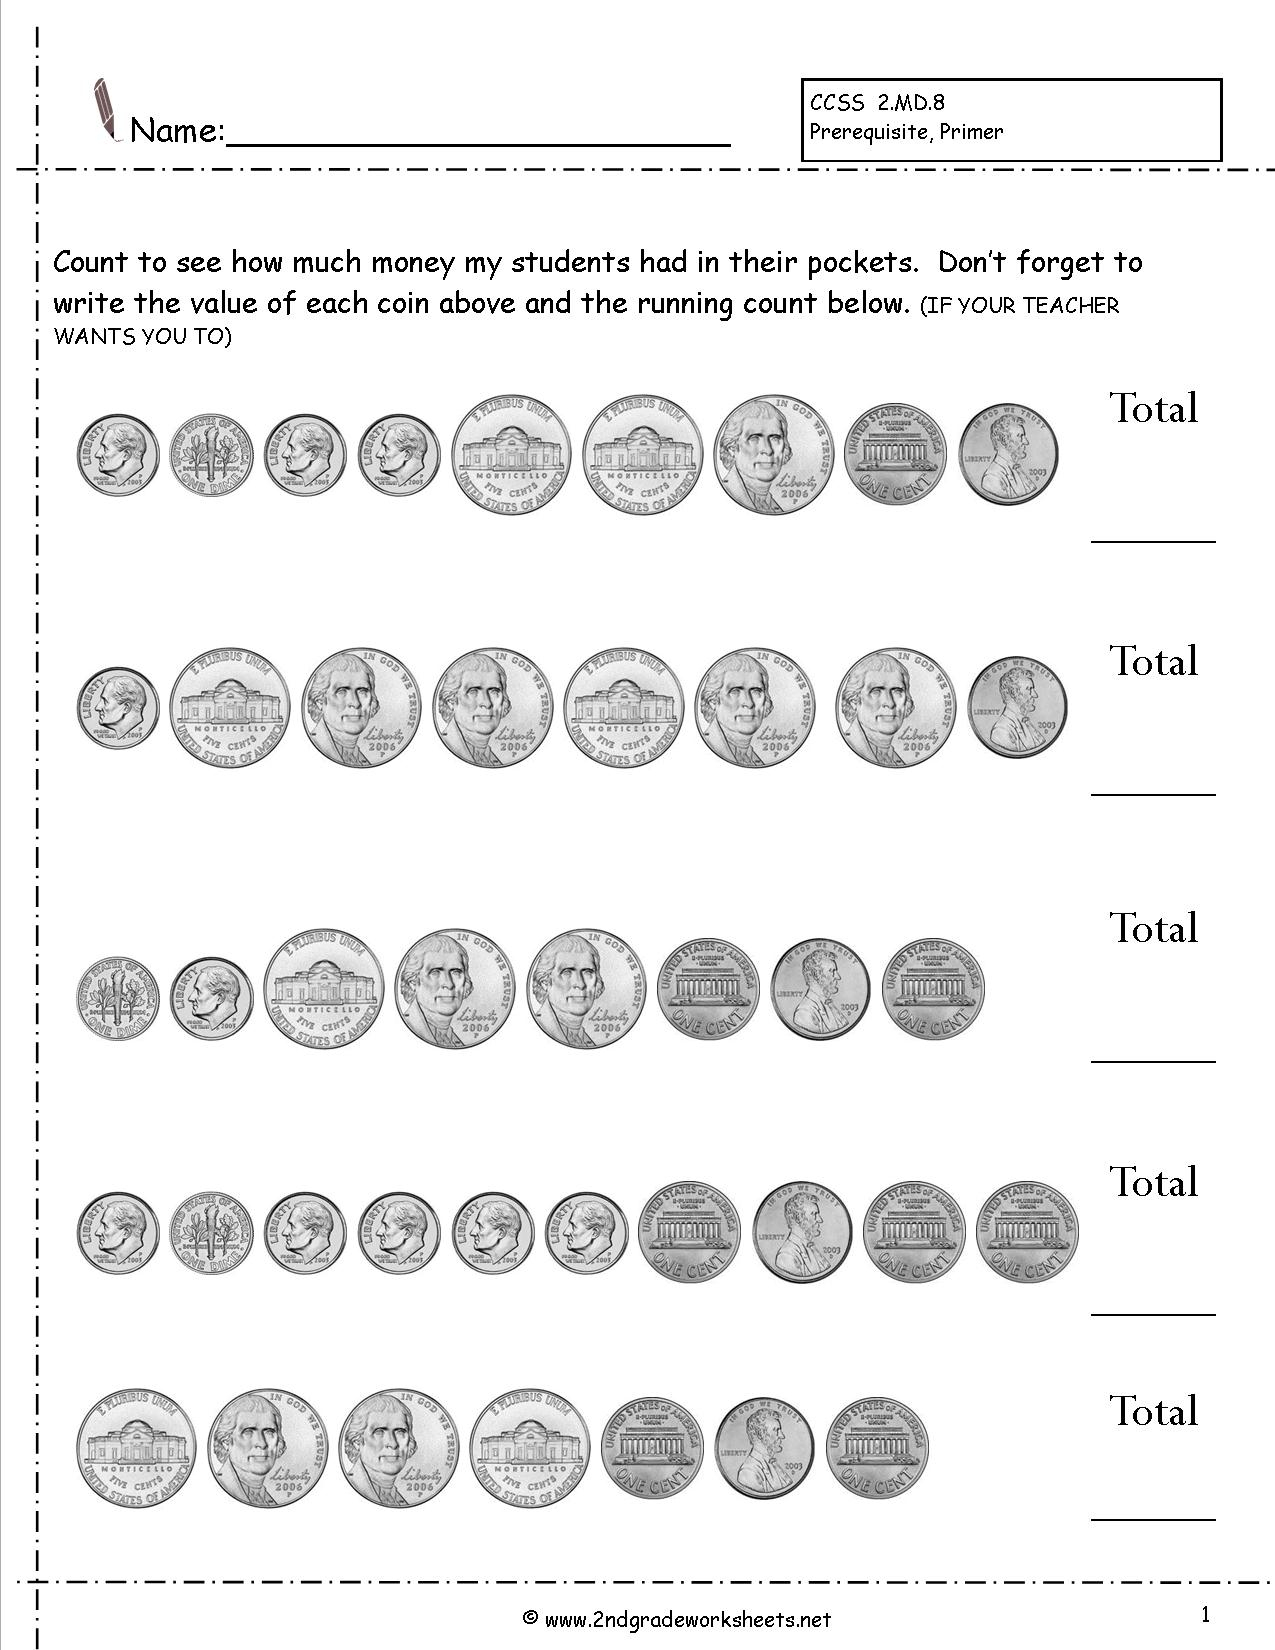 Counting Coins And Money Worksheets And Printouts | Printable Money Worksheets